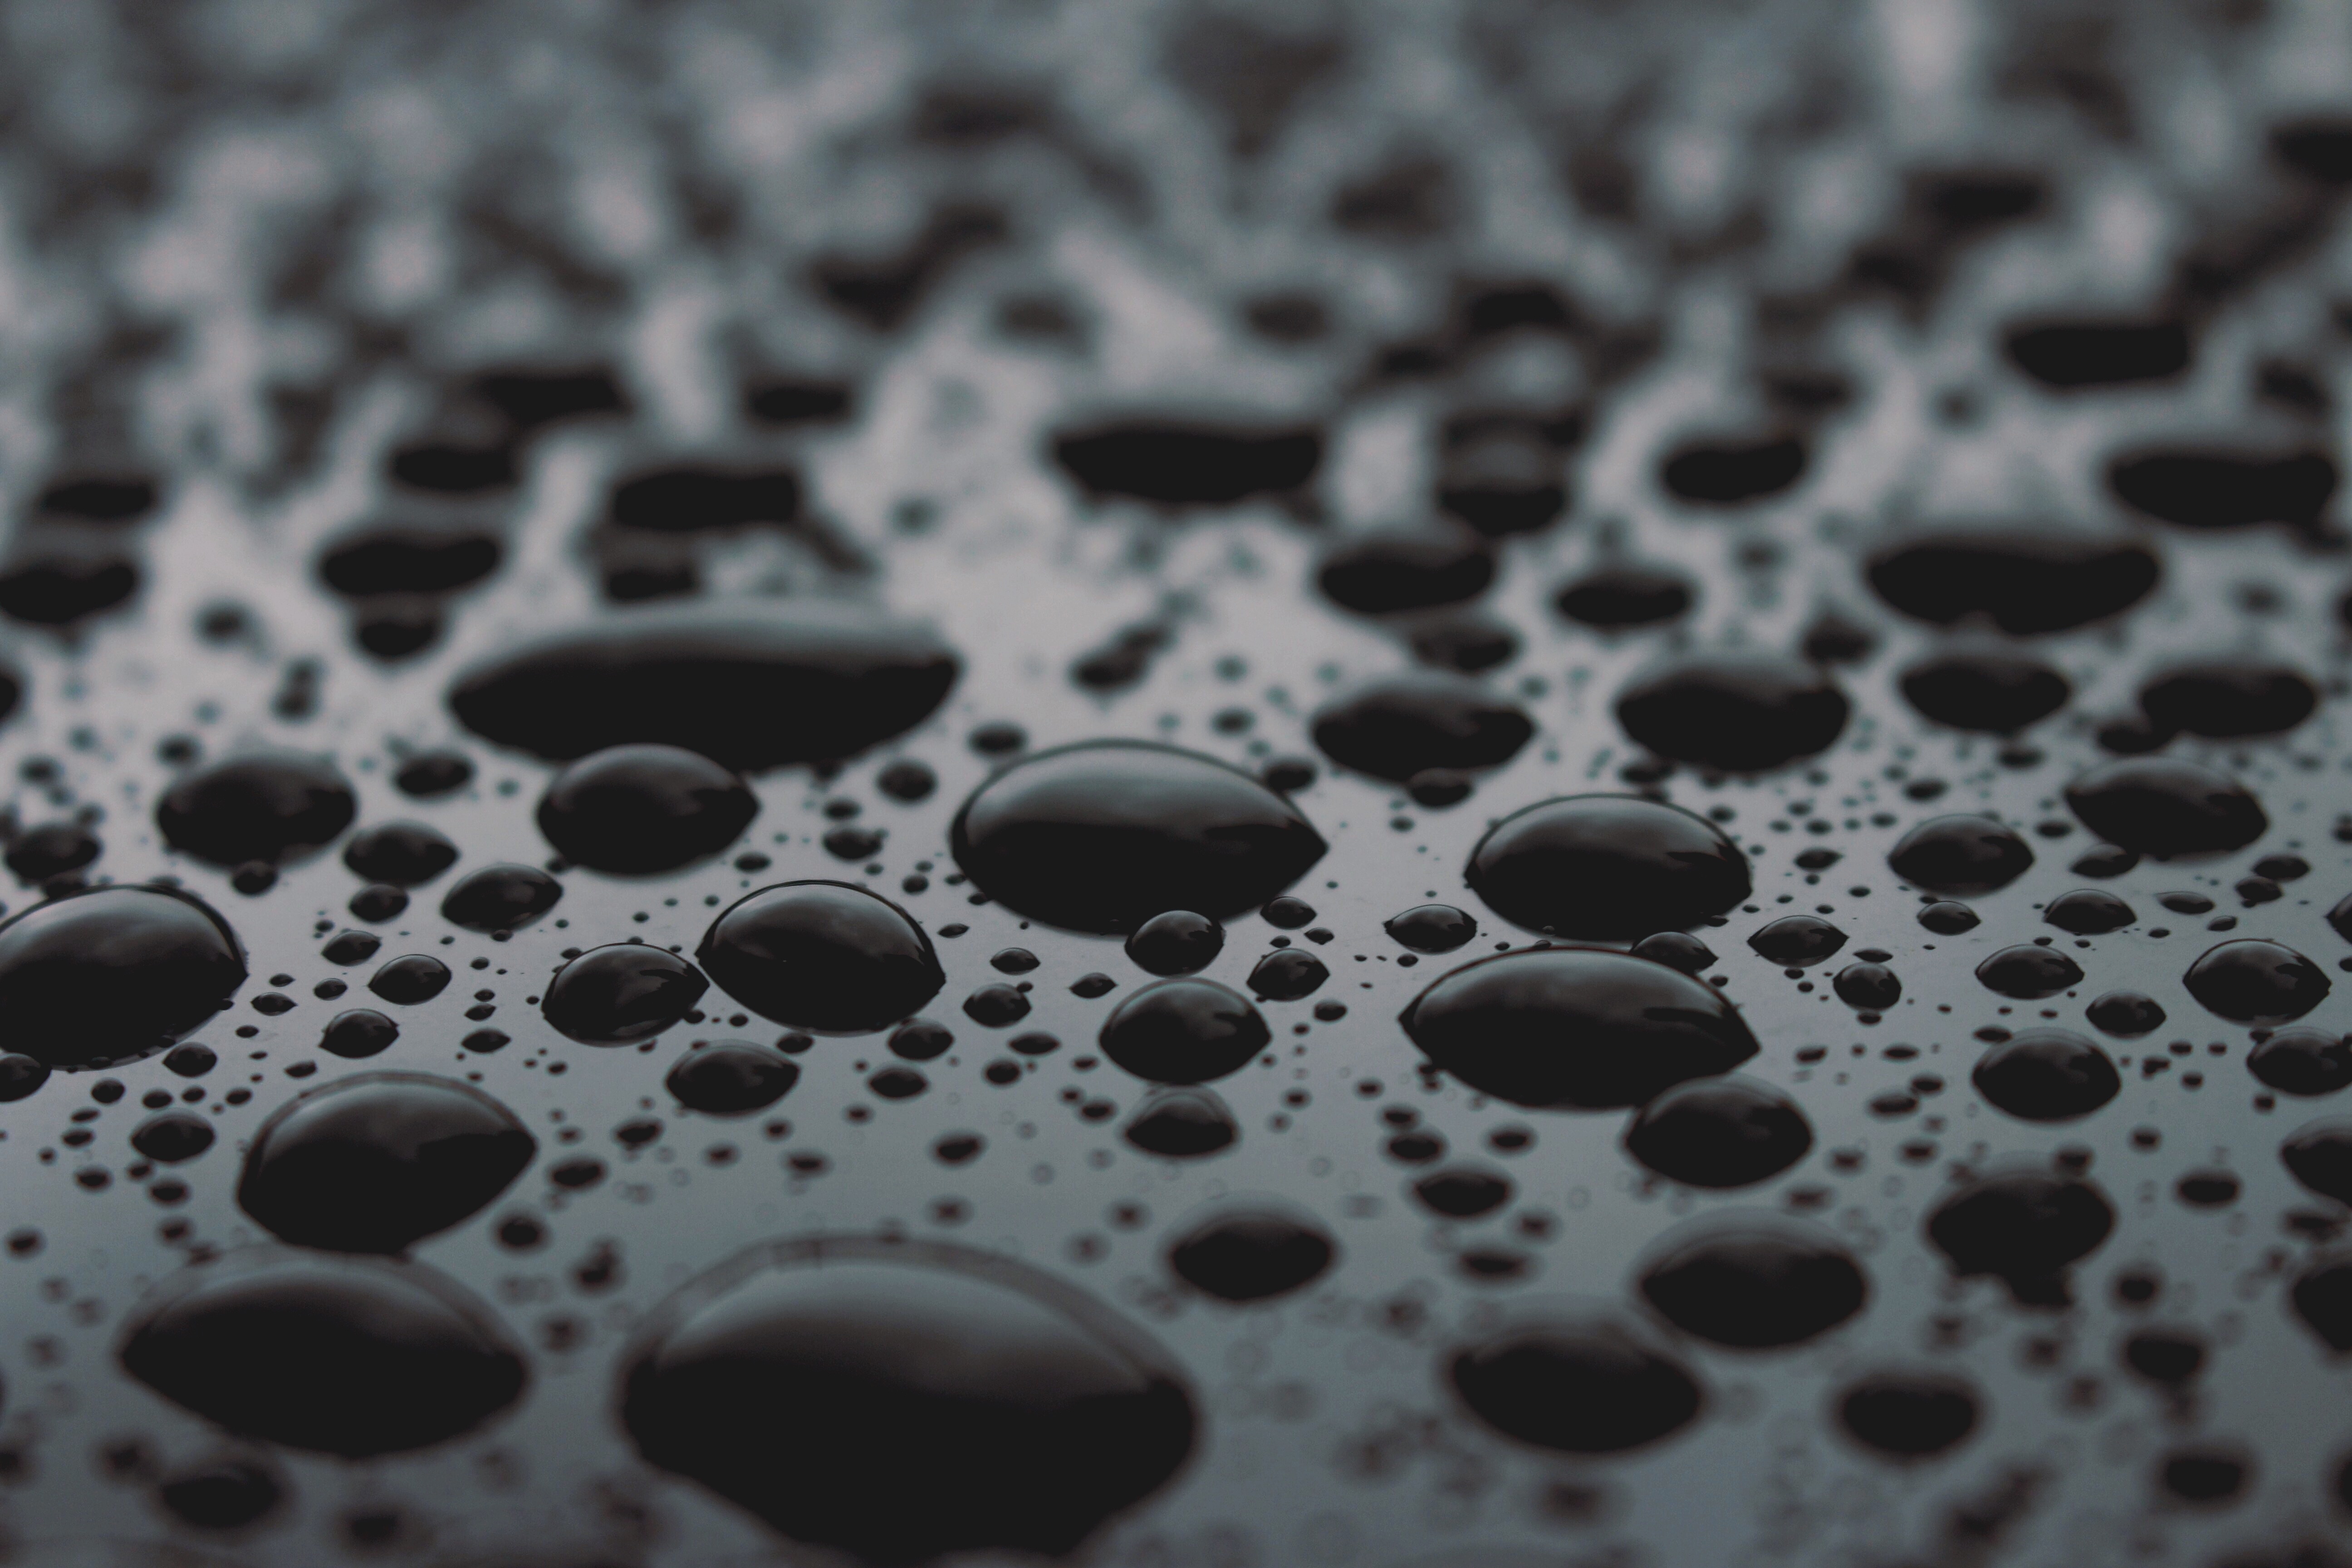 Wallpaper with water droplets on a glass surface